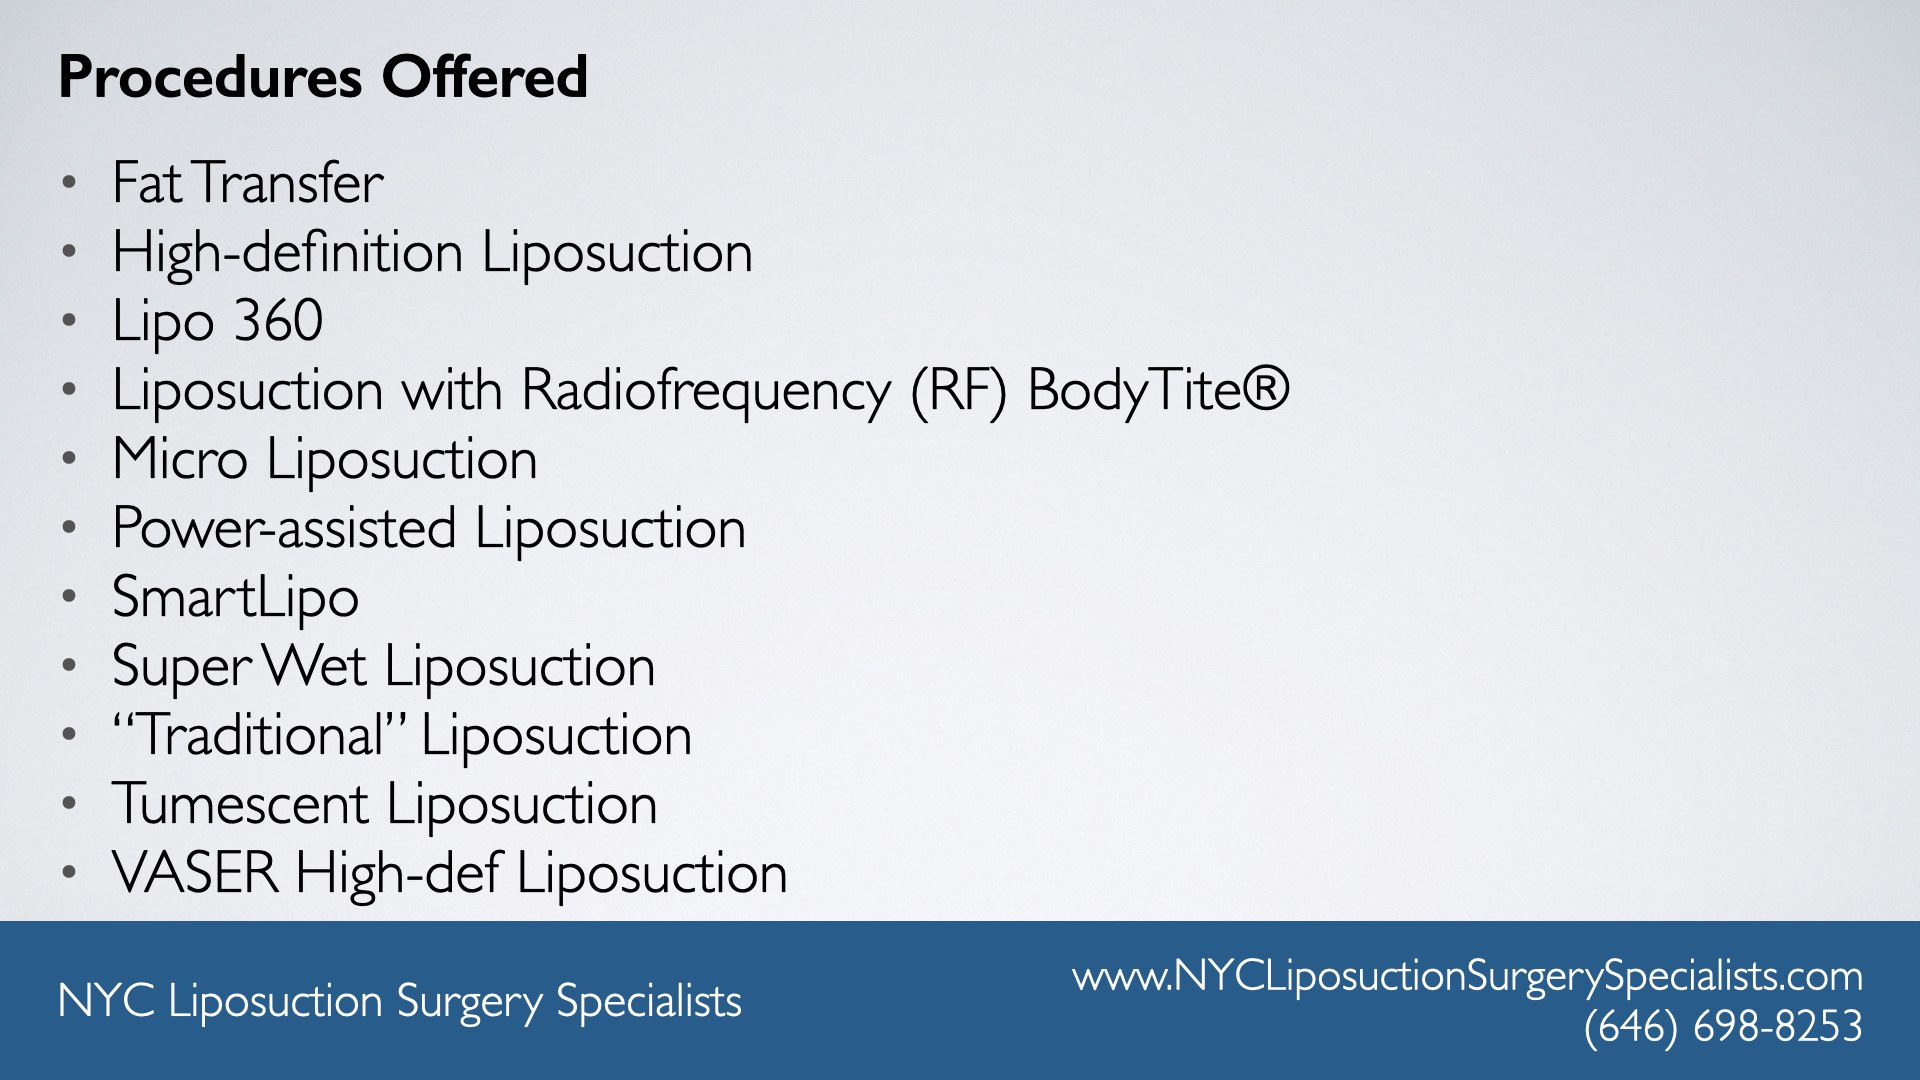 NYC Liposuction Surgery Specialists 590 5th Ave Suite 1144, New York, NY 10036